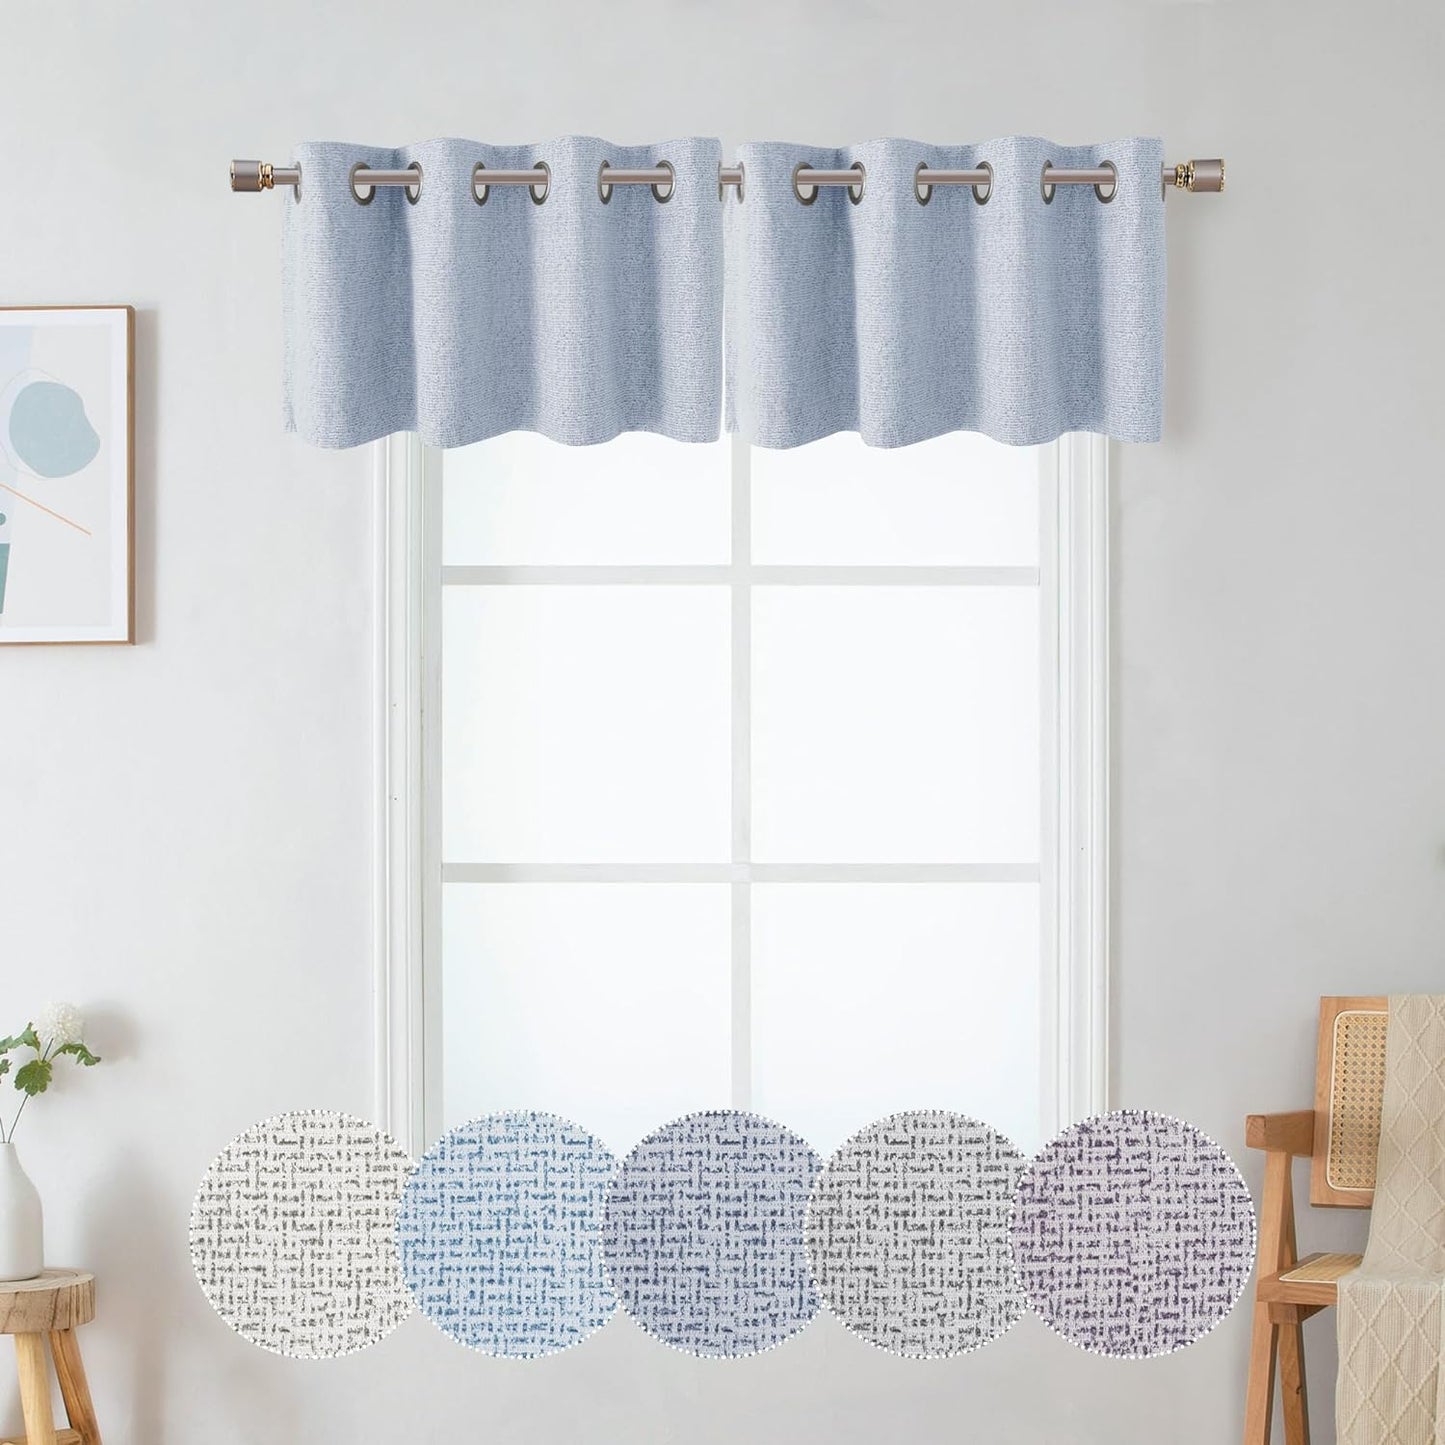 OWENIE Luke Black Out Curtains 63 Inch Long 2 Panels for Bedroom, Geometric Printed Completely Blackout Room Darkening Curtains, Grommet Thermal Insulated Living Room Curtain, 2 PCS, Each 42Wx63L Inch  OWENIE Light Blue 42"W X 14"L | 2 Pcs 